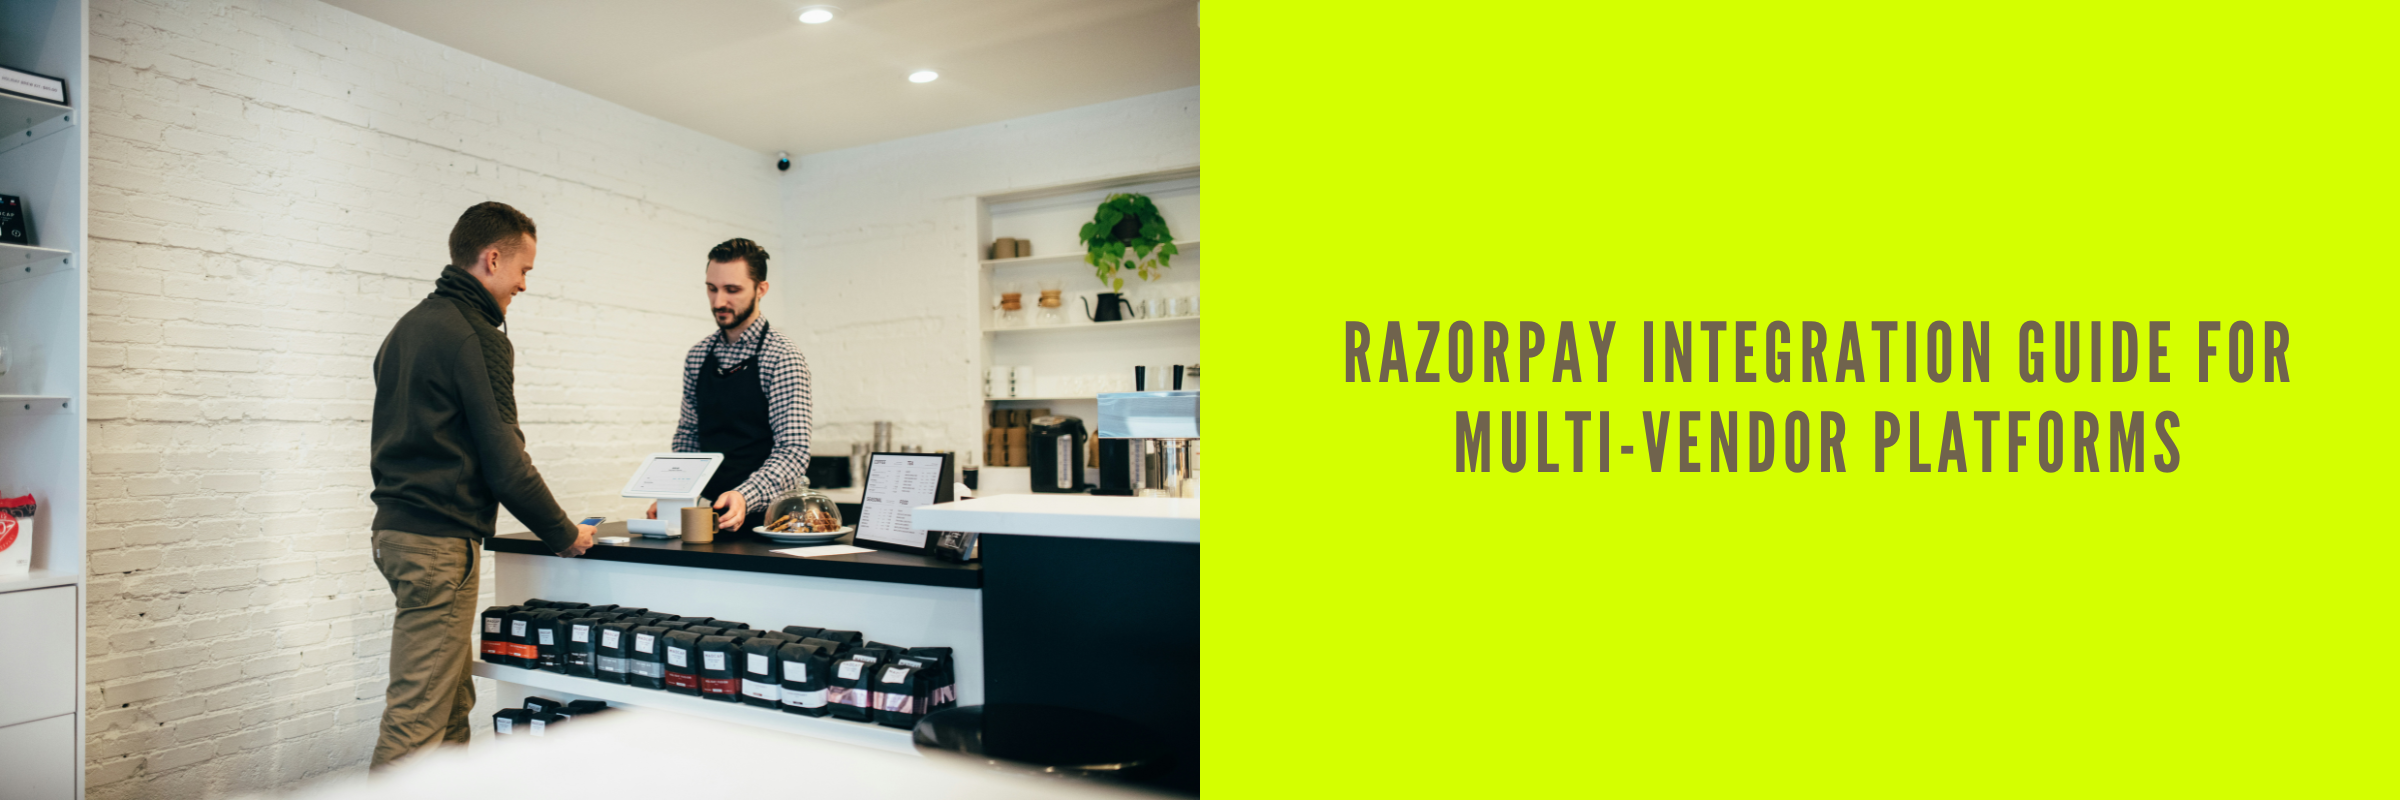 Mastering Razorpay Integration: A Multi-Vendor Platform’s Guide to Seamless Payments